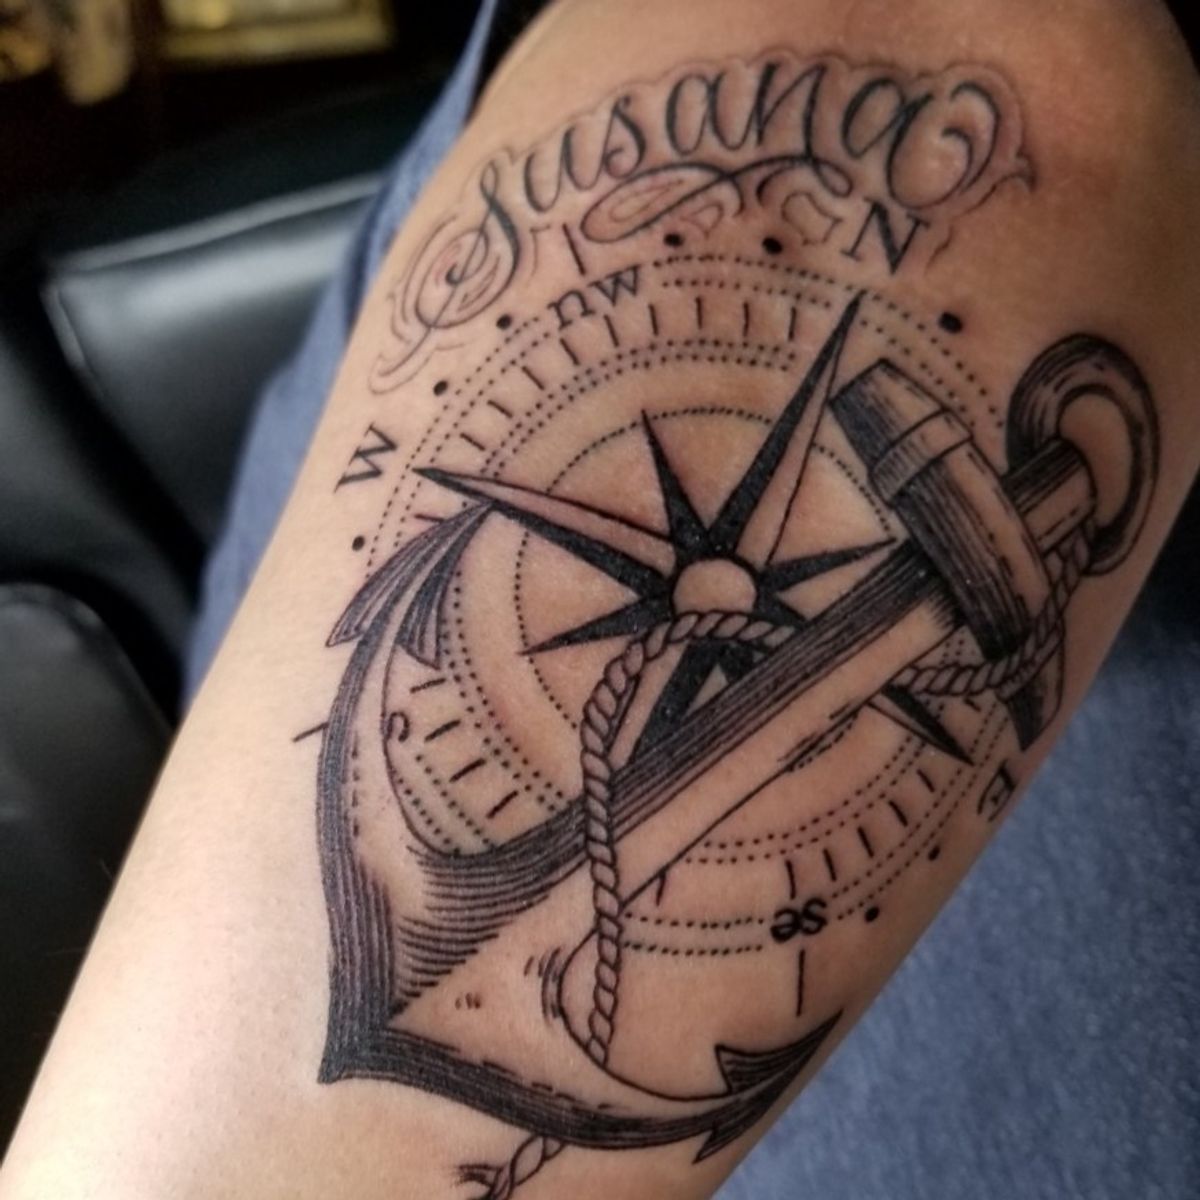 Tattoo uploaded by Julio • Anchor with compass • Tattoodo